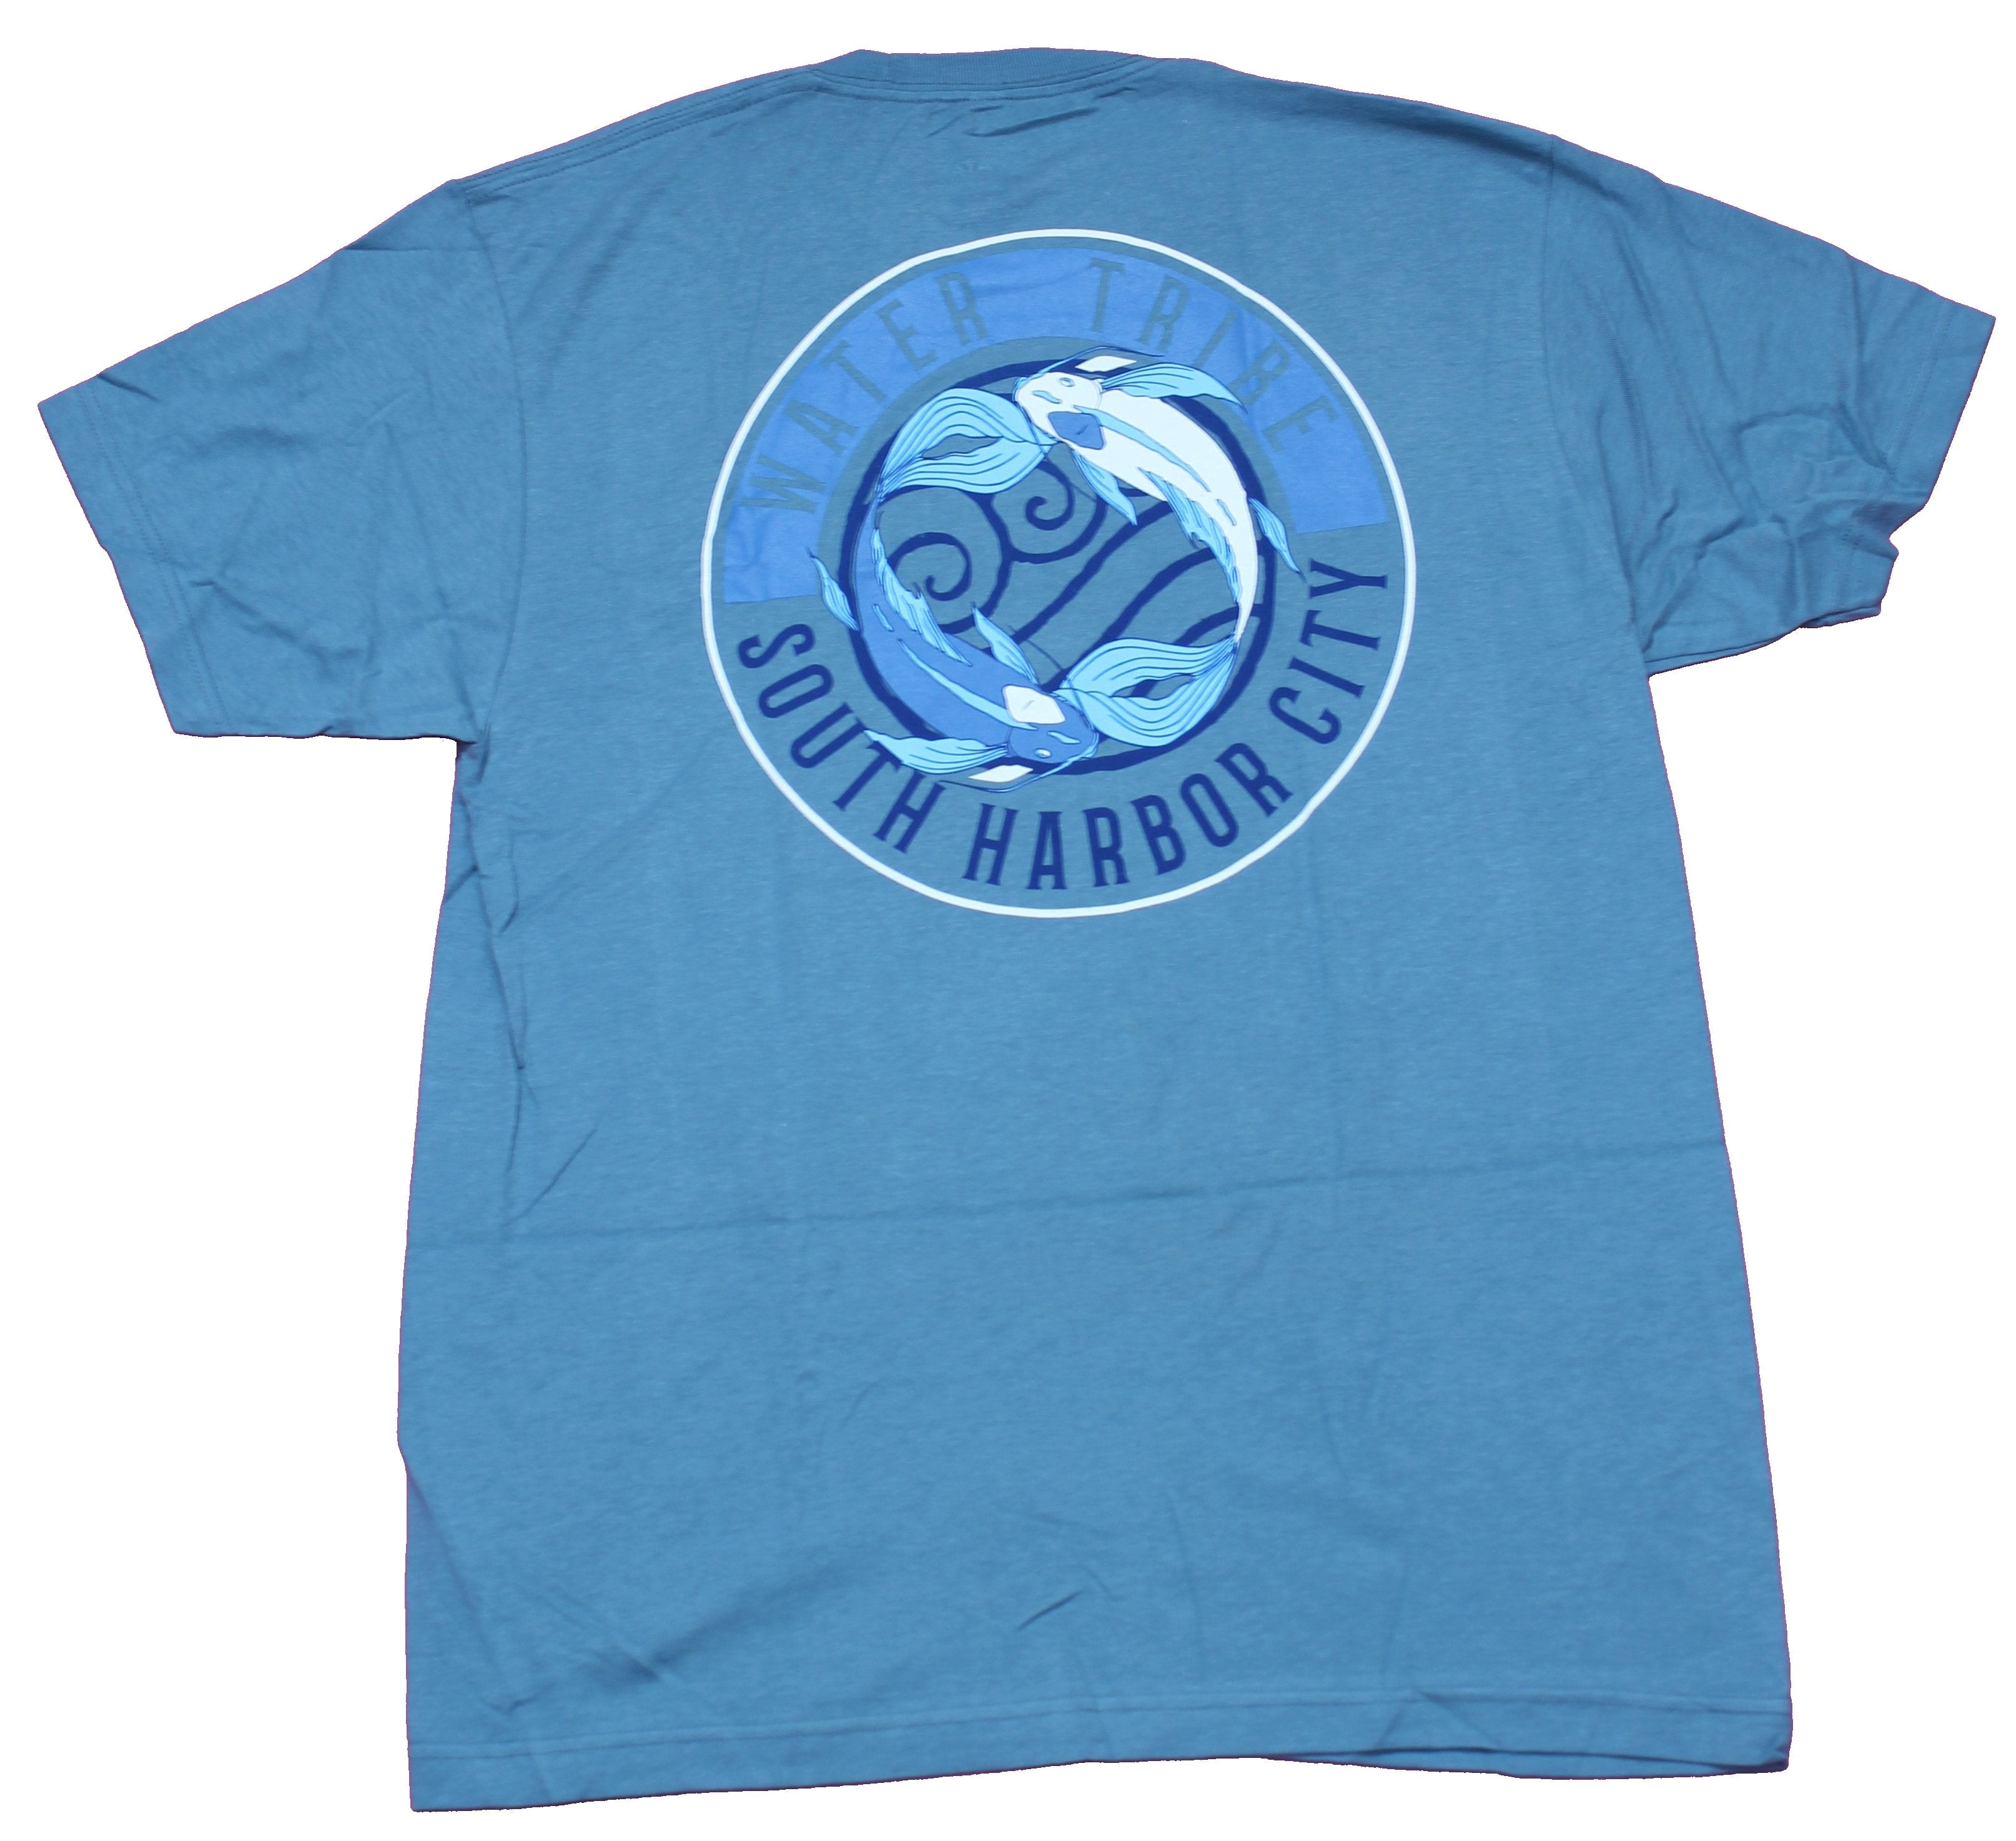 Avatar the Last Airbender Mens T-Shirt - Water Tribe Lapel South Harbor City Back